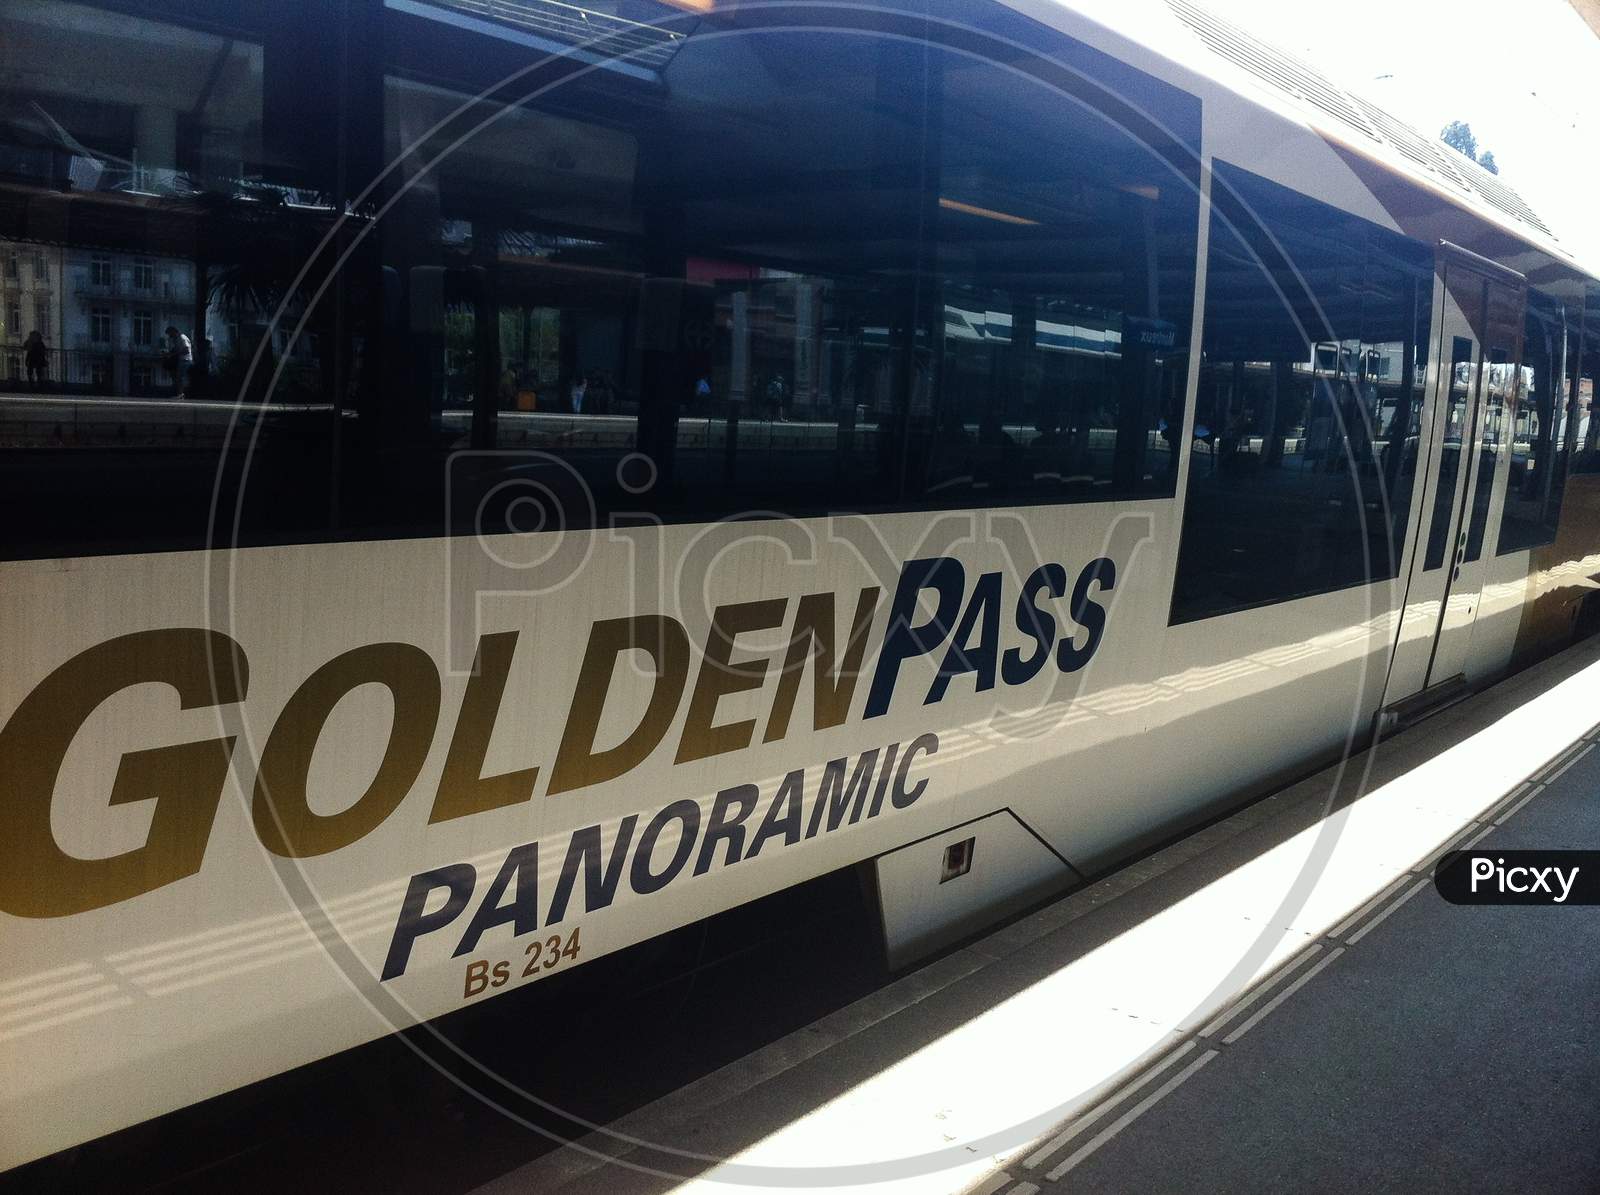 GoldenPass Panoramic train is the scenic train ride which connects central Switzerland with Lake Geneva.